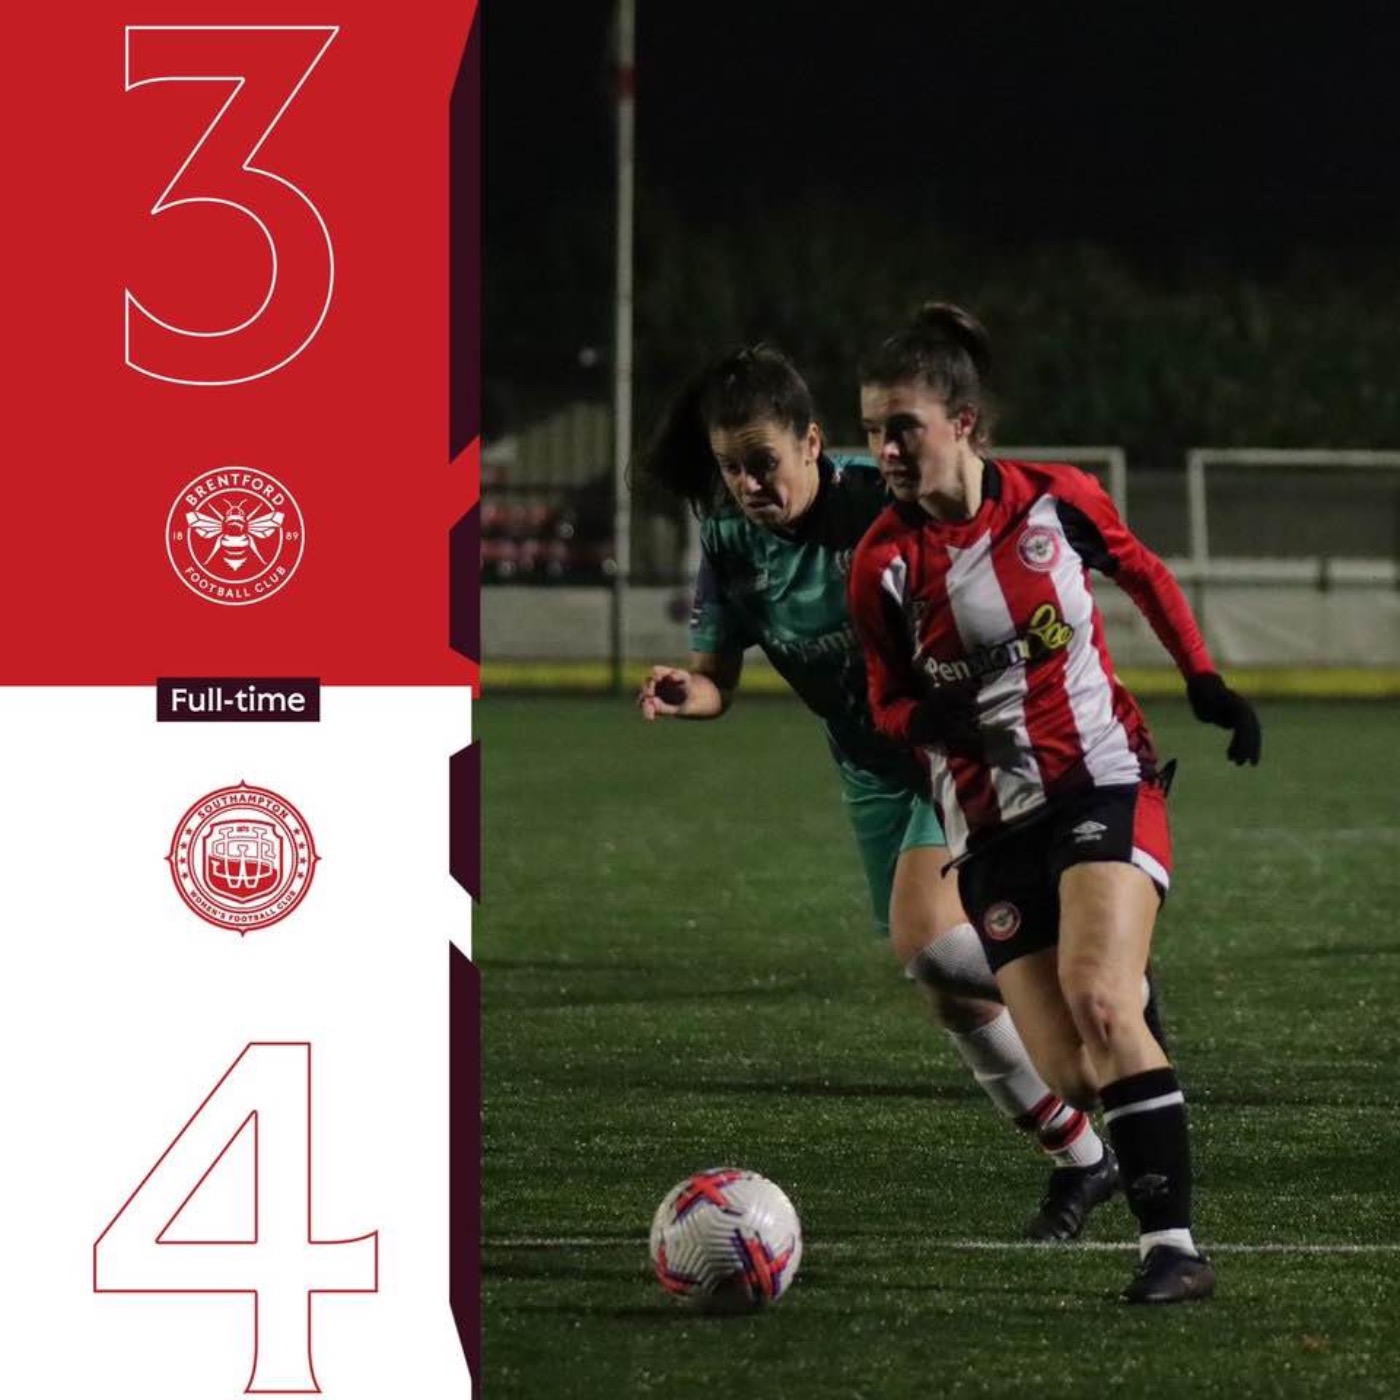 FA Cup: Brentford Women 3 Southampton Women 4 (AET) - post-match podcast from the stands